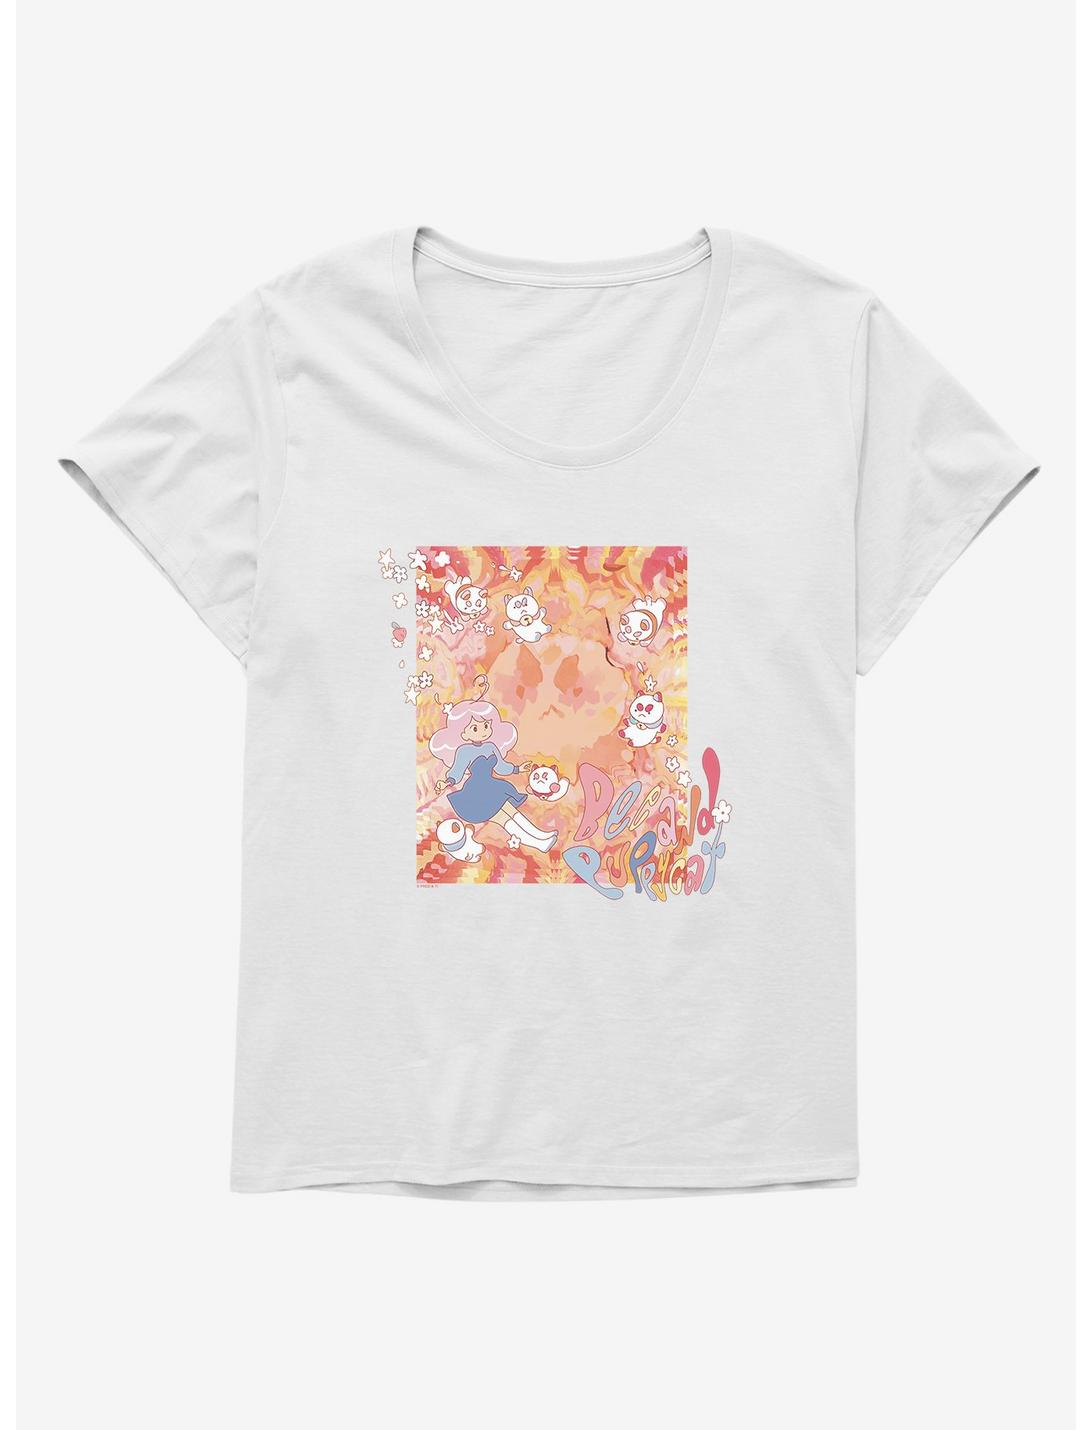 Bee And Puppycat Watercolor Art Flowers Girls T-Shirt Plus Size, WHITE, hi-res